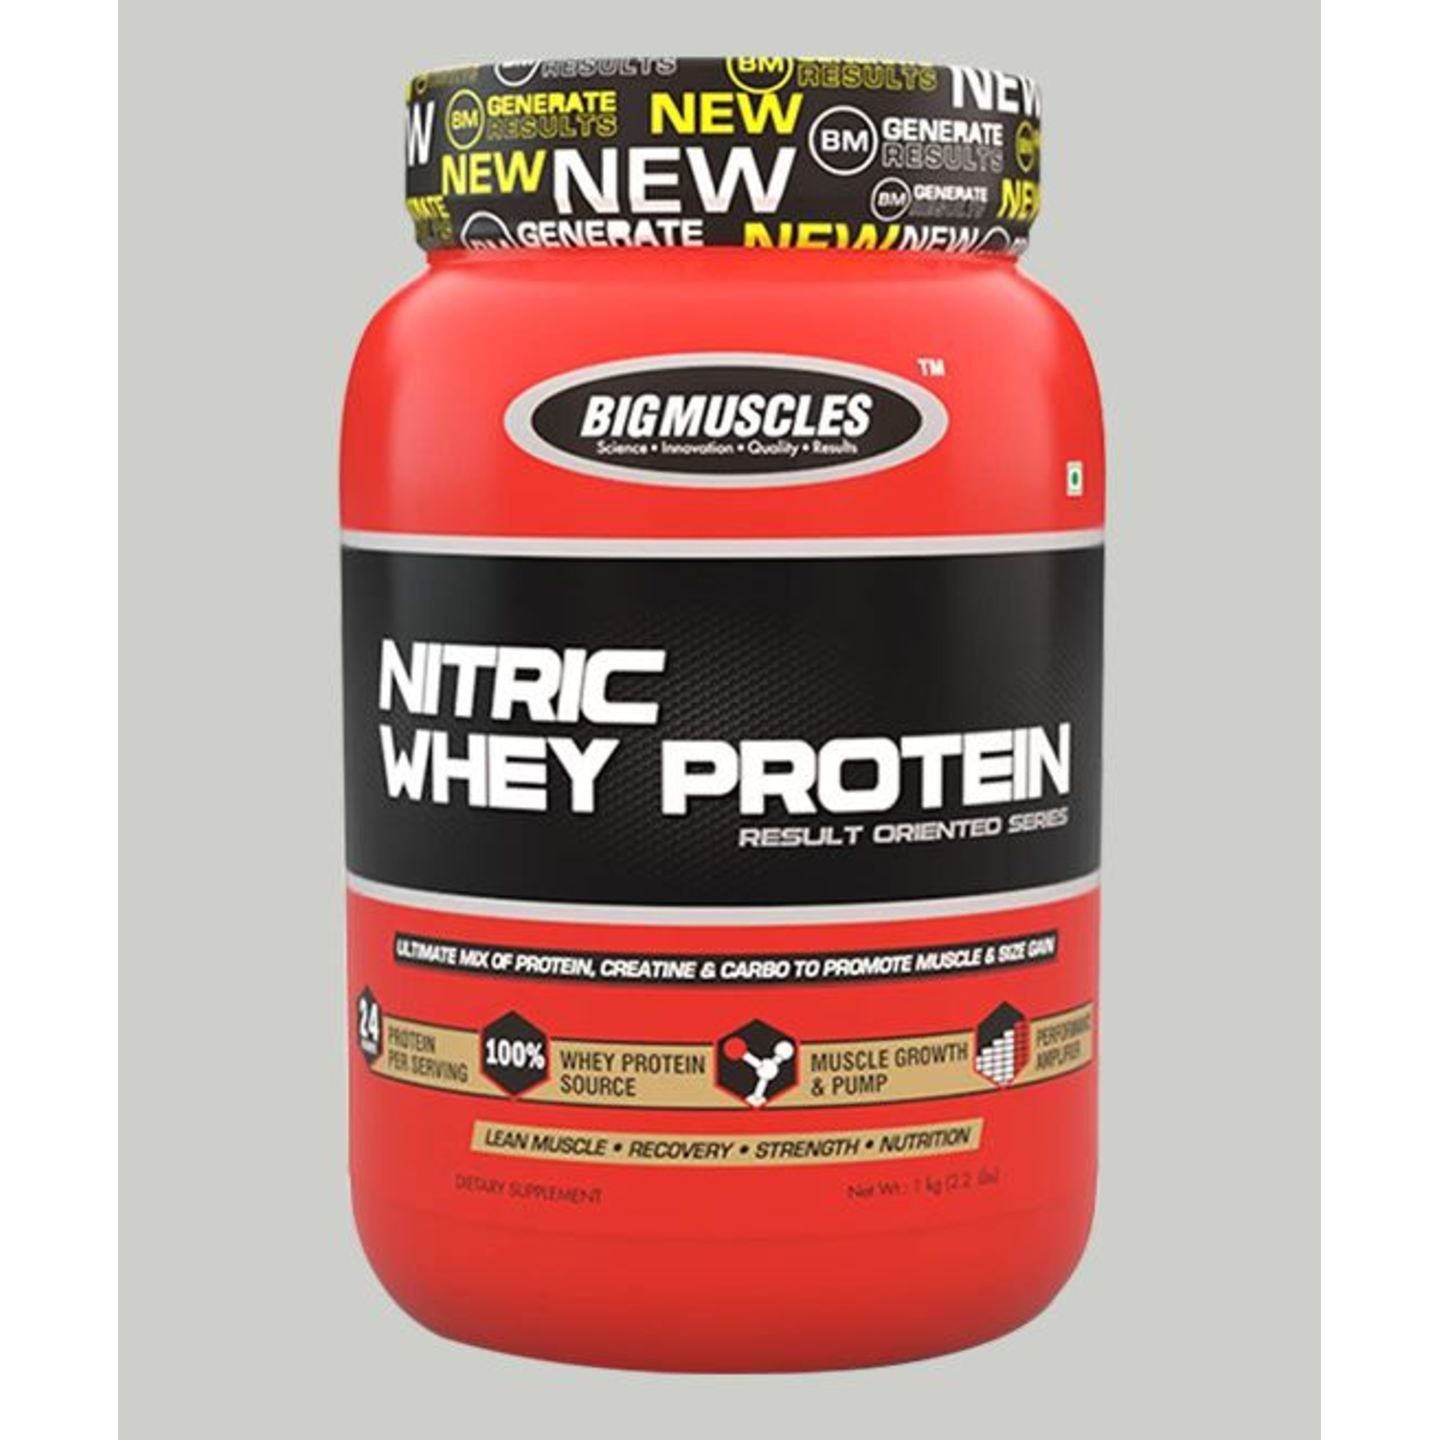 MastMart Bigmuscles Nutrition Nitric Whey Protein Caffe Latte 900 gm